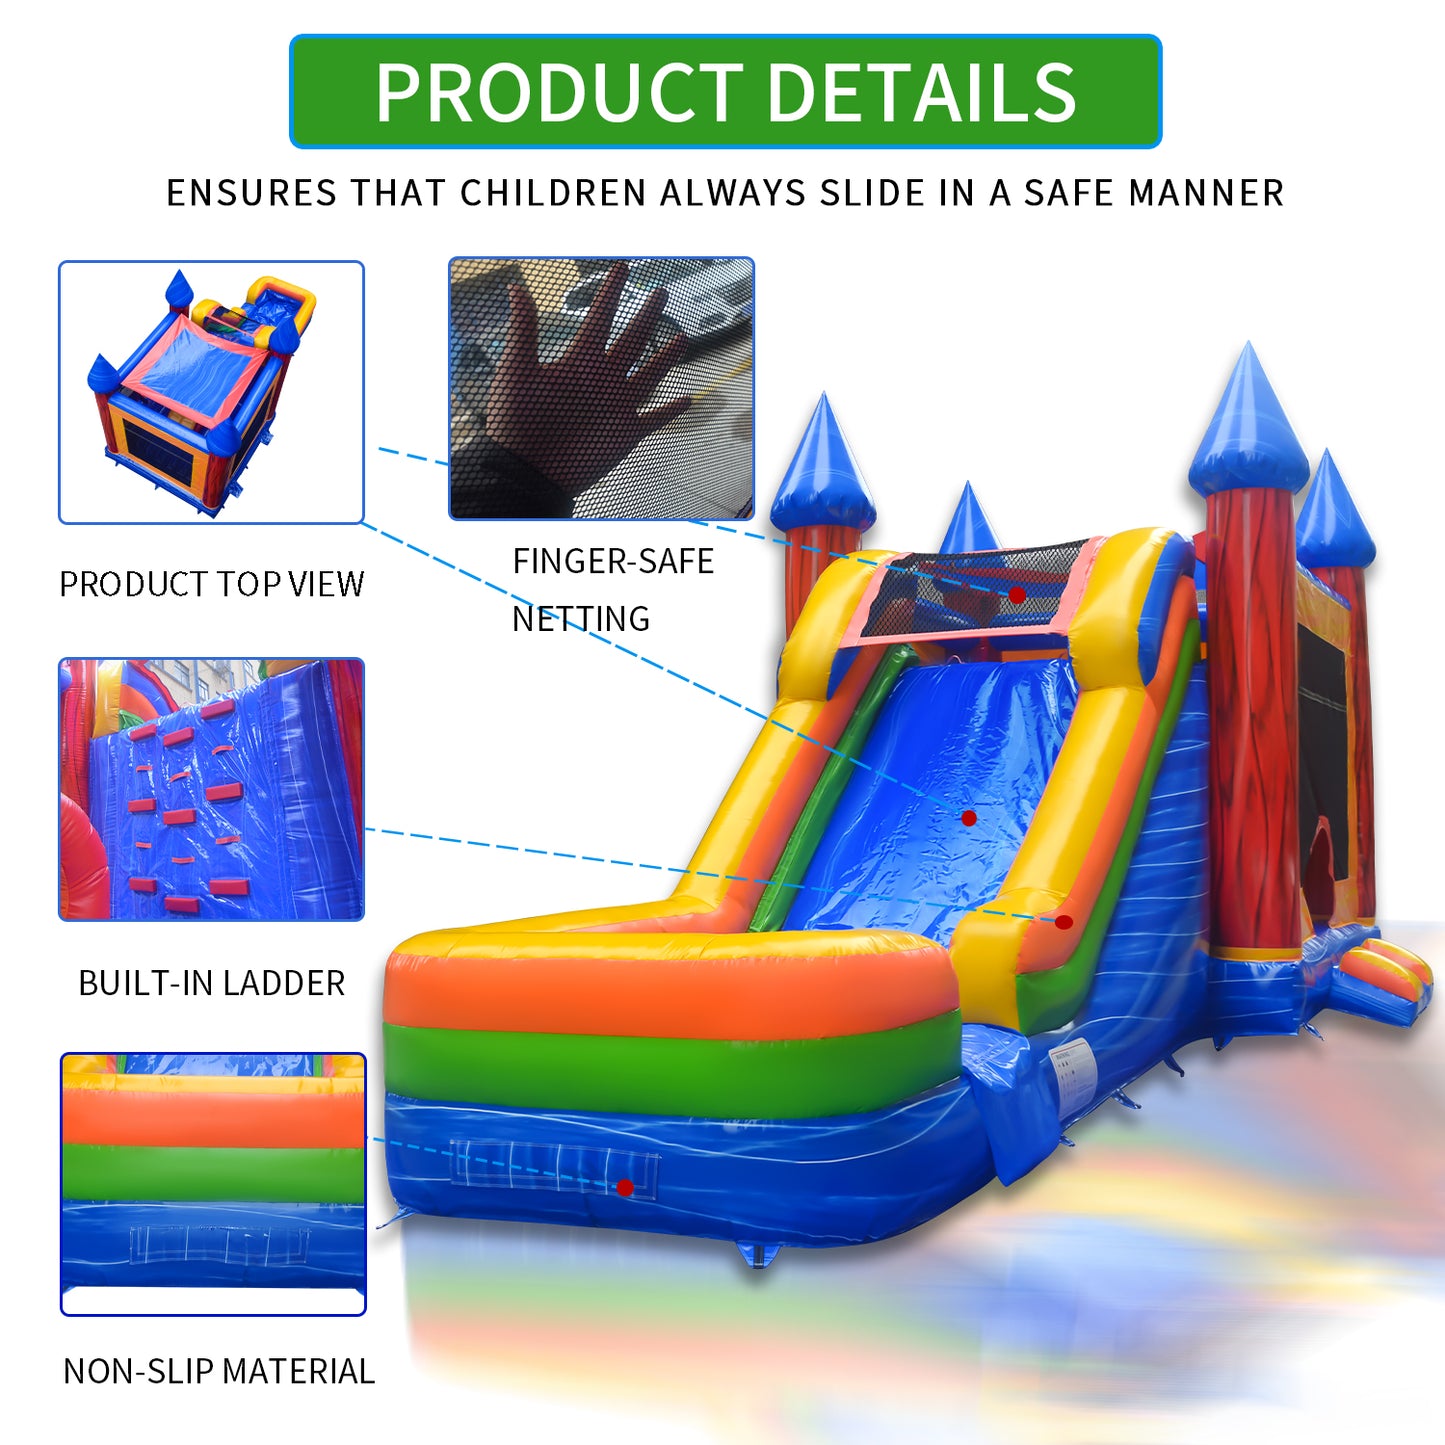 30' x 13' x 15'H Wet/Dry Commercial-grade Inflatable Water Slide #11182